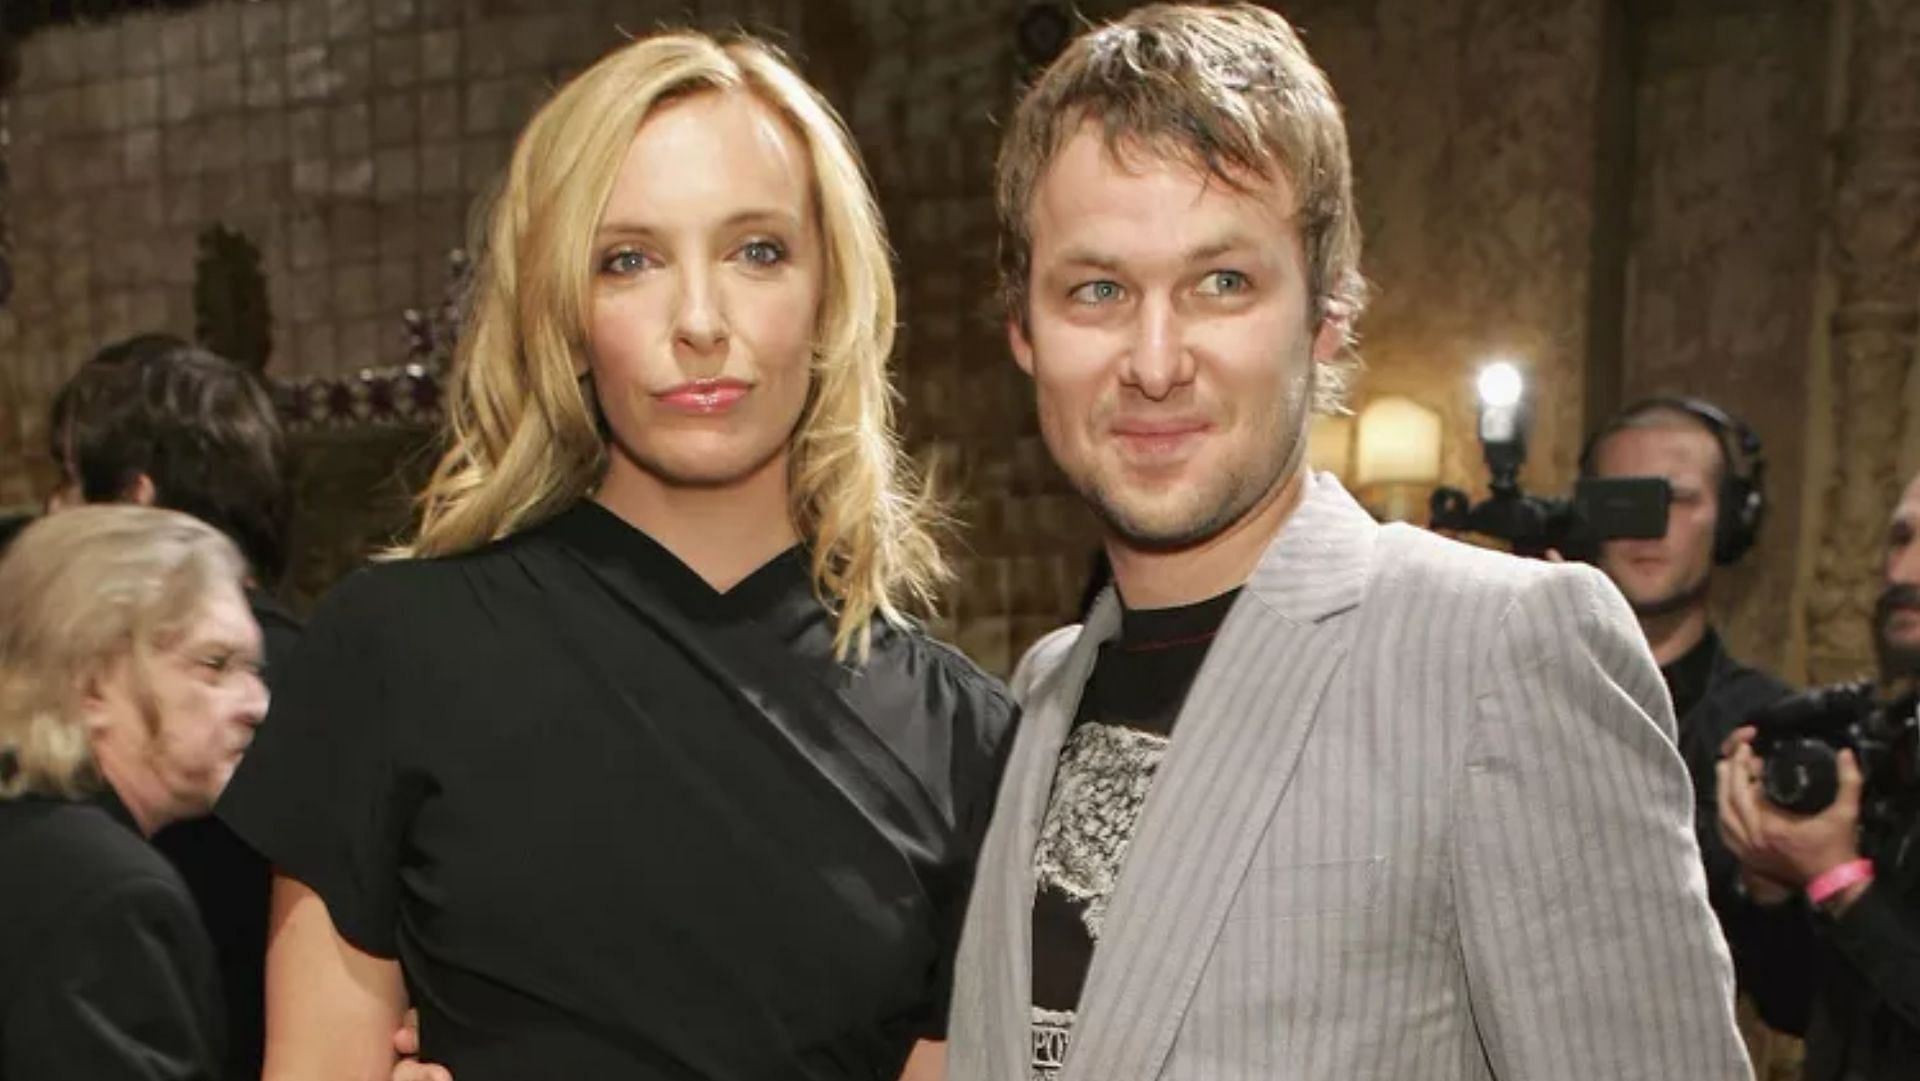 Toni Collette and Dave Galafassi photographed together. (Image via Kristian Dowling/Getty)